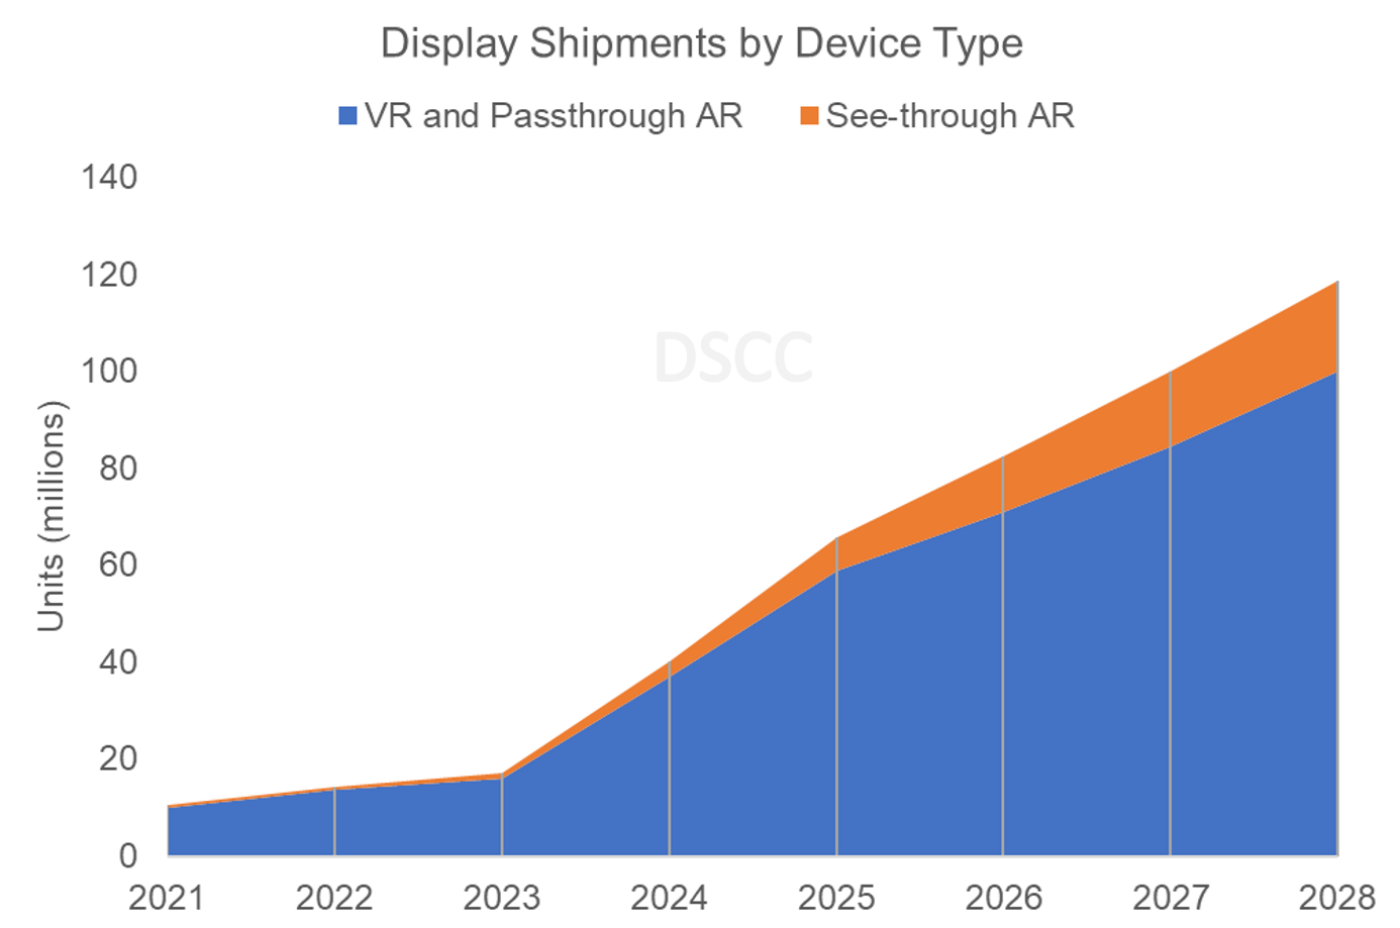 VR Display Shipments by Device Type - VR and Passthrough VR, See-through VR - 2021-2028